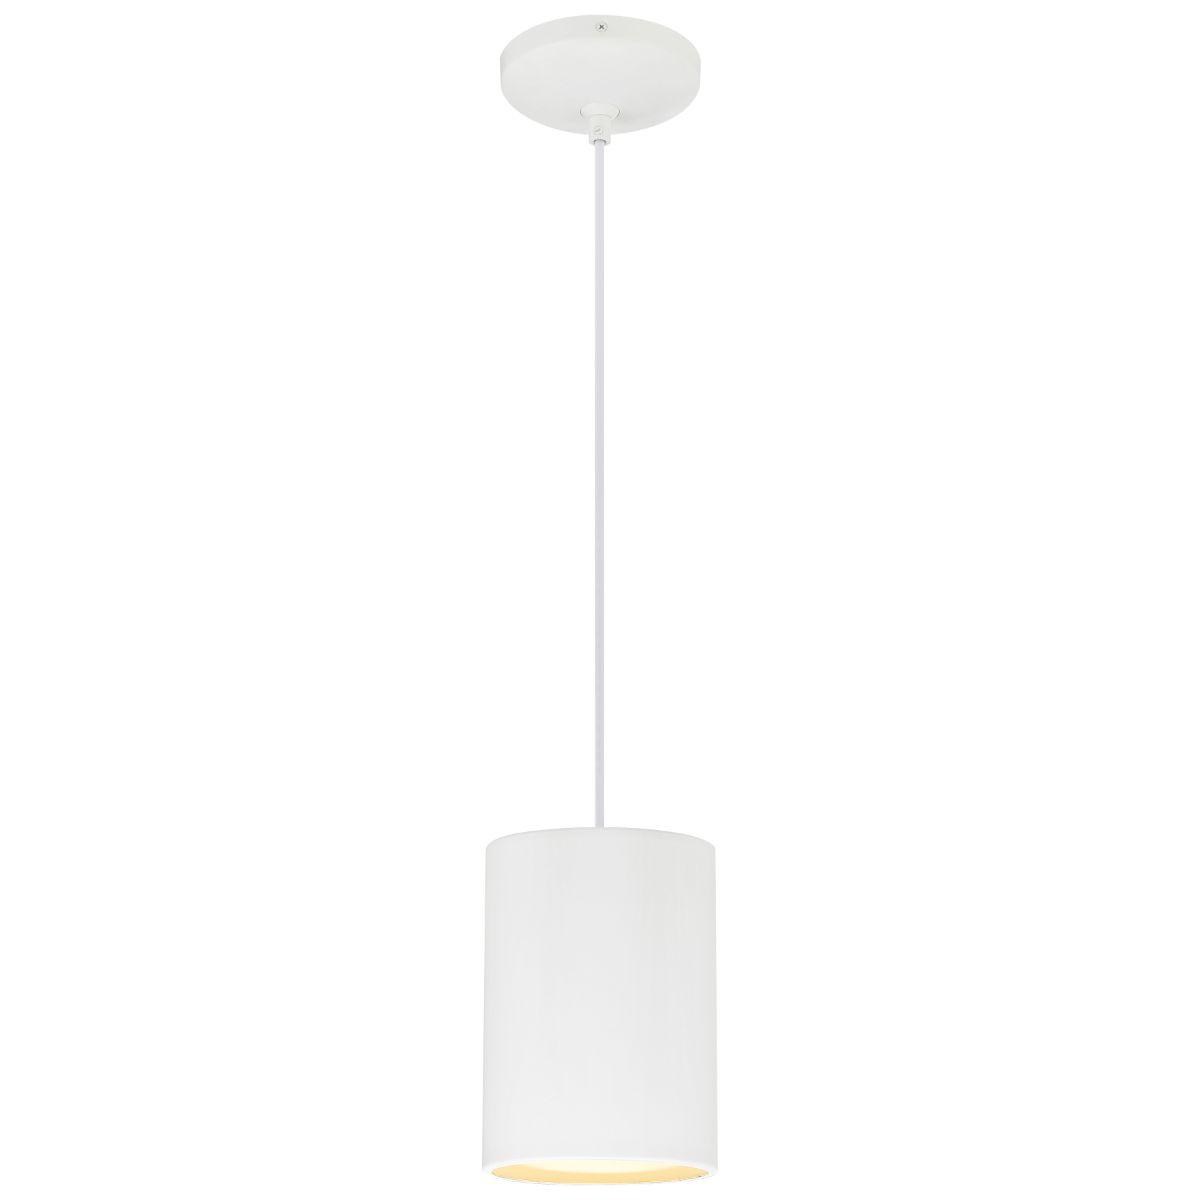 Pilson XL 7 in. Pendant Light with Cord